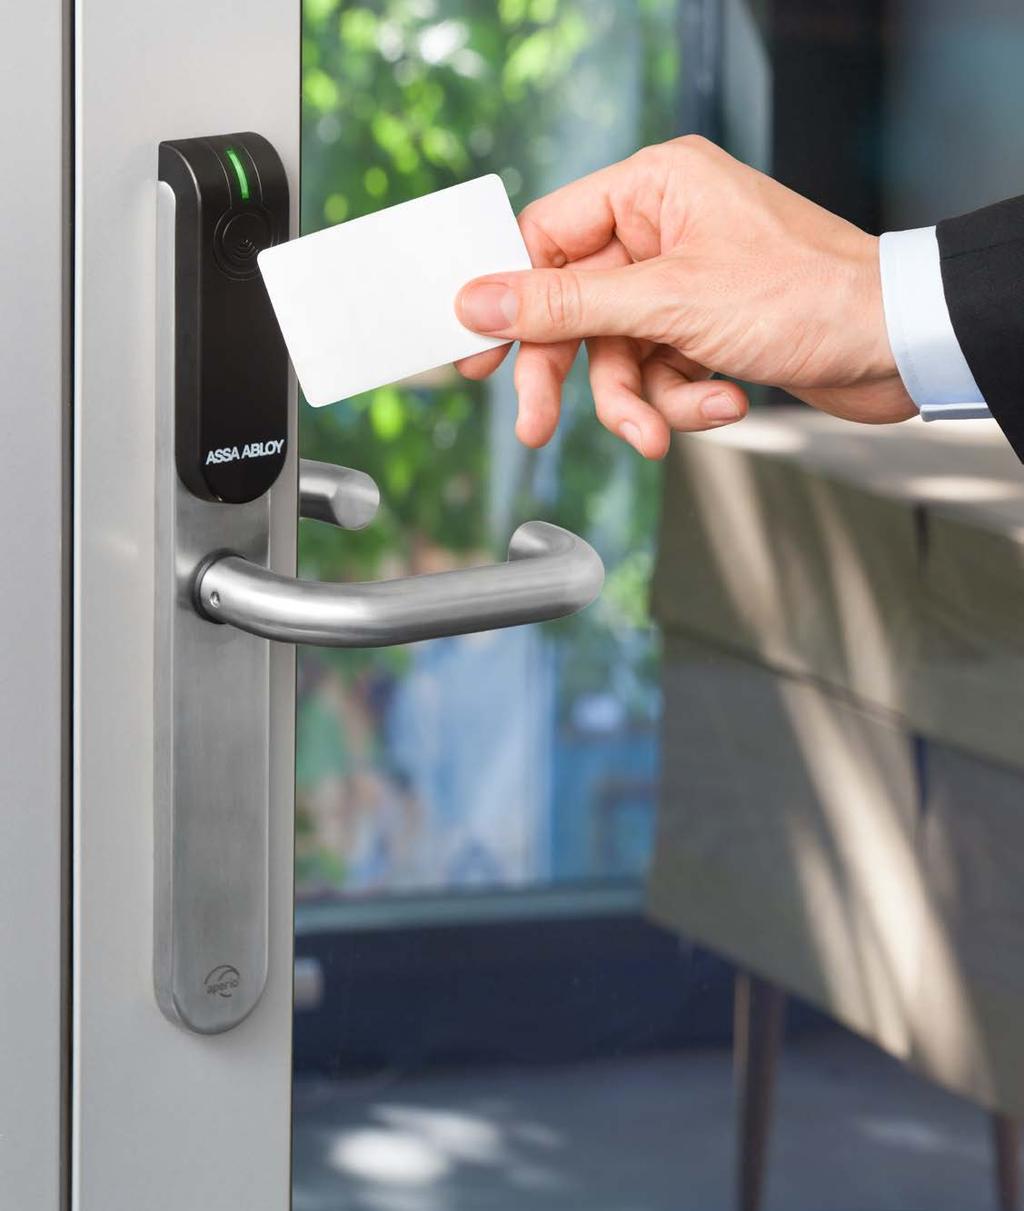 Expand your access control